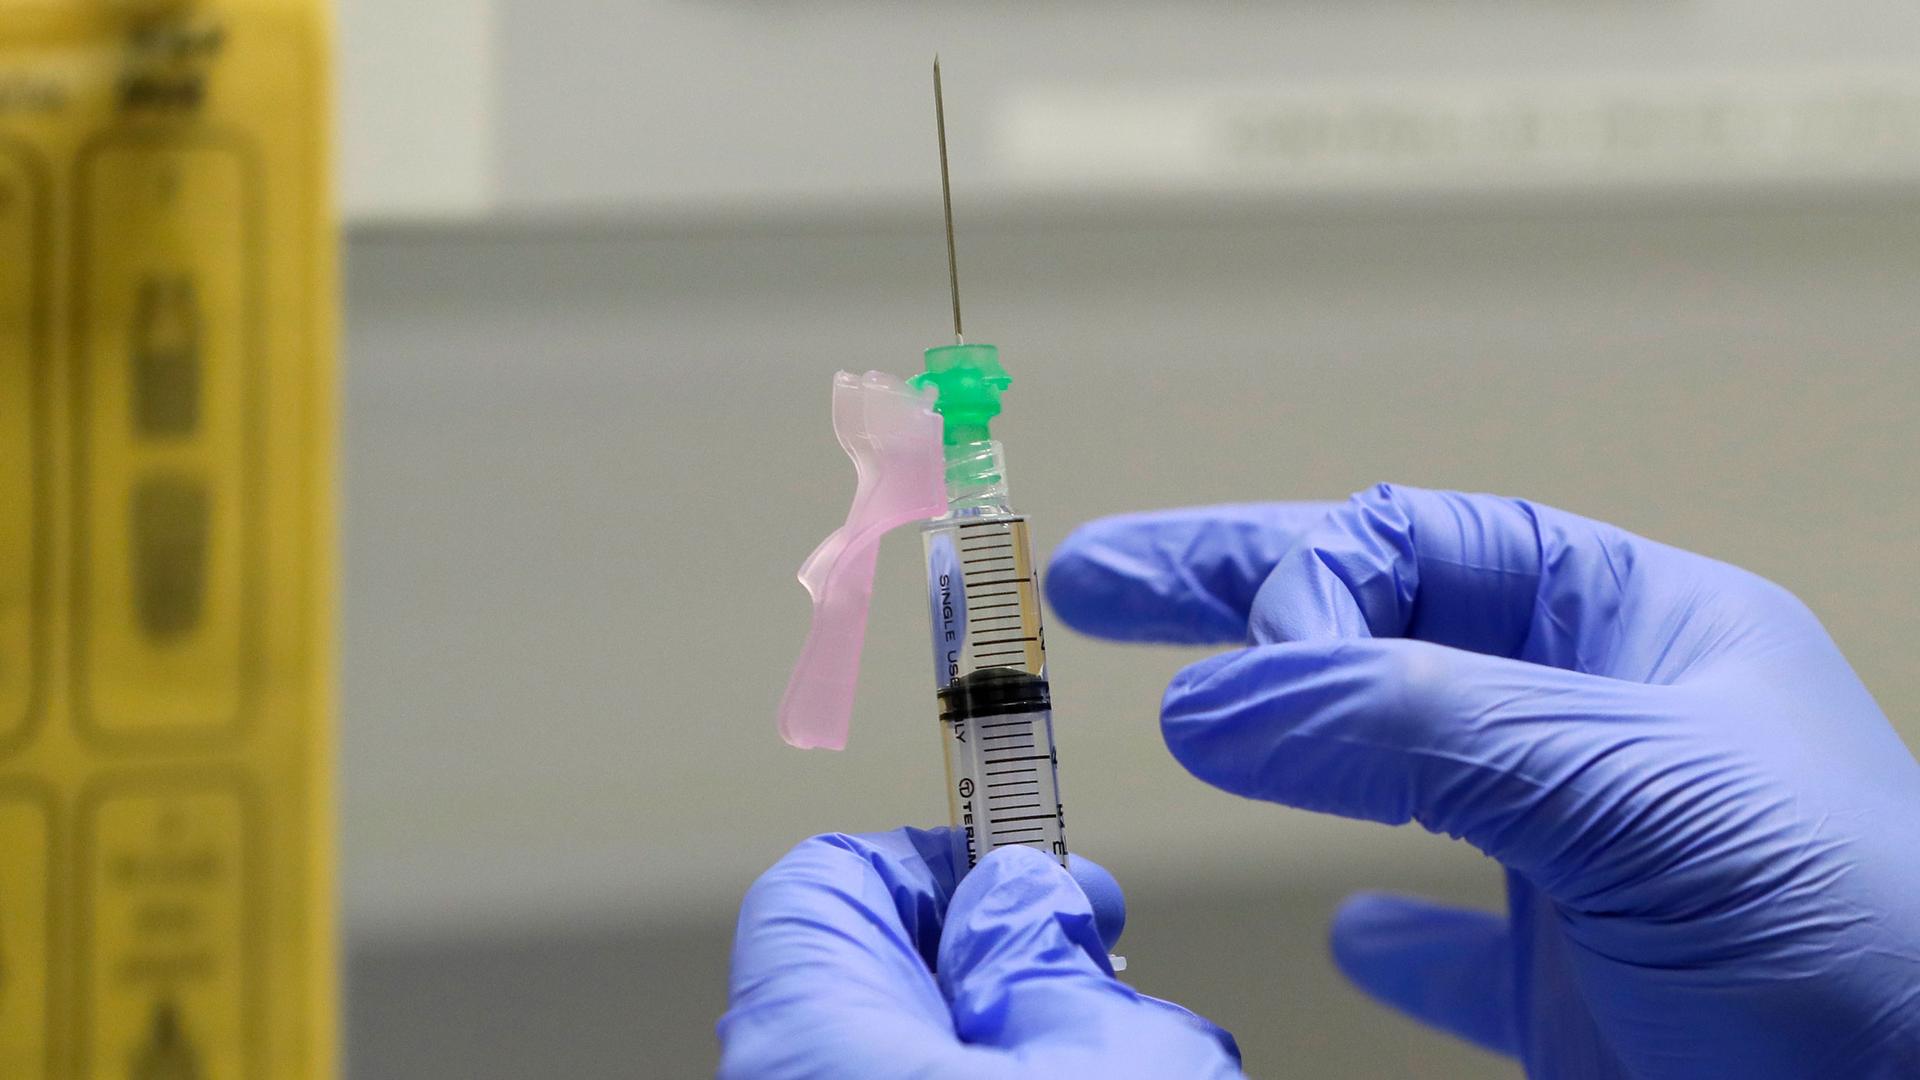 A close-up photo of a researcher's gloved hands and a syringe filled with a vaccine trial.